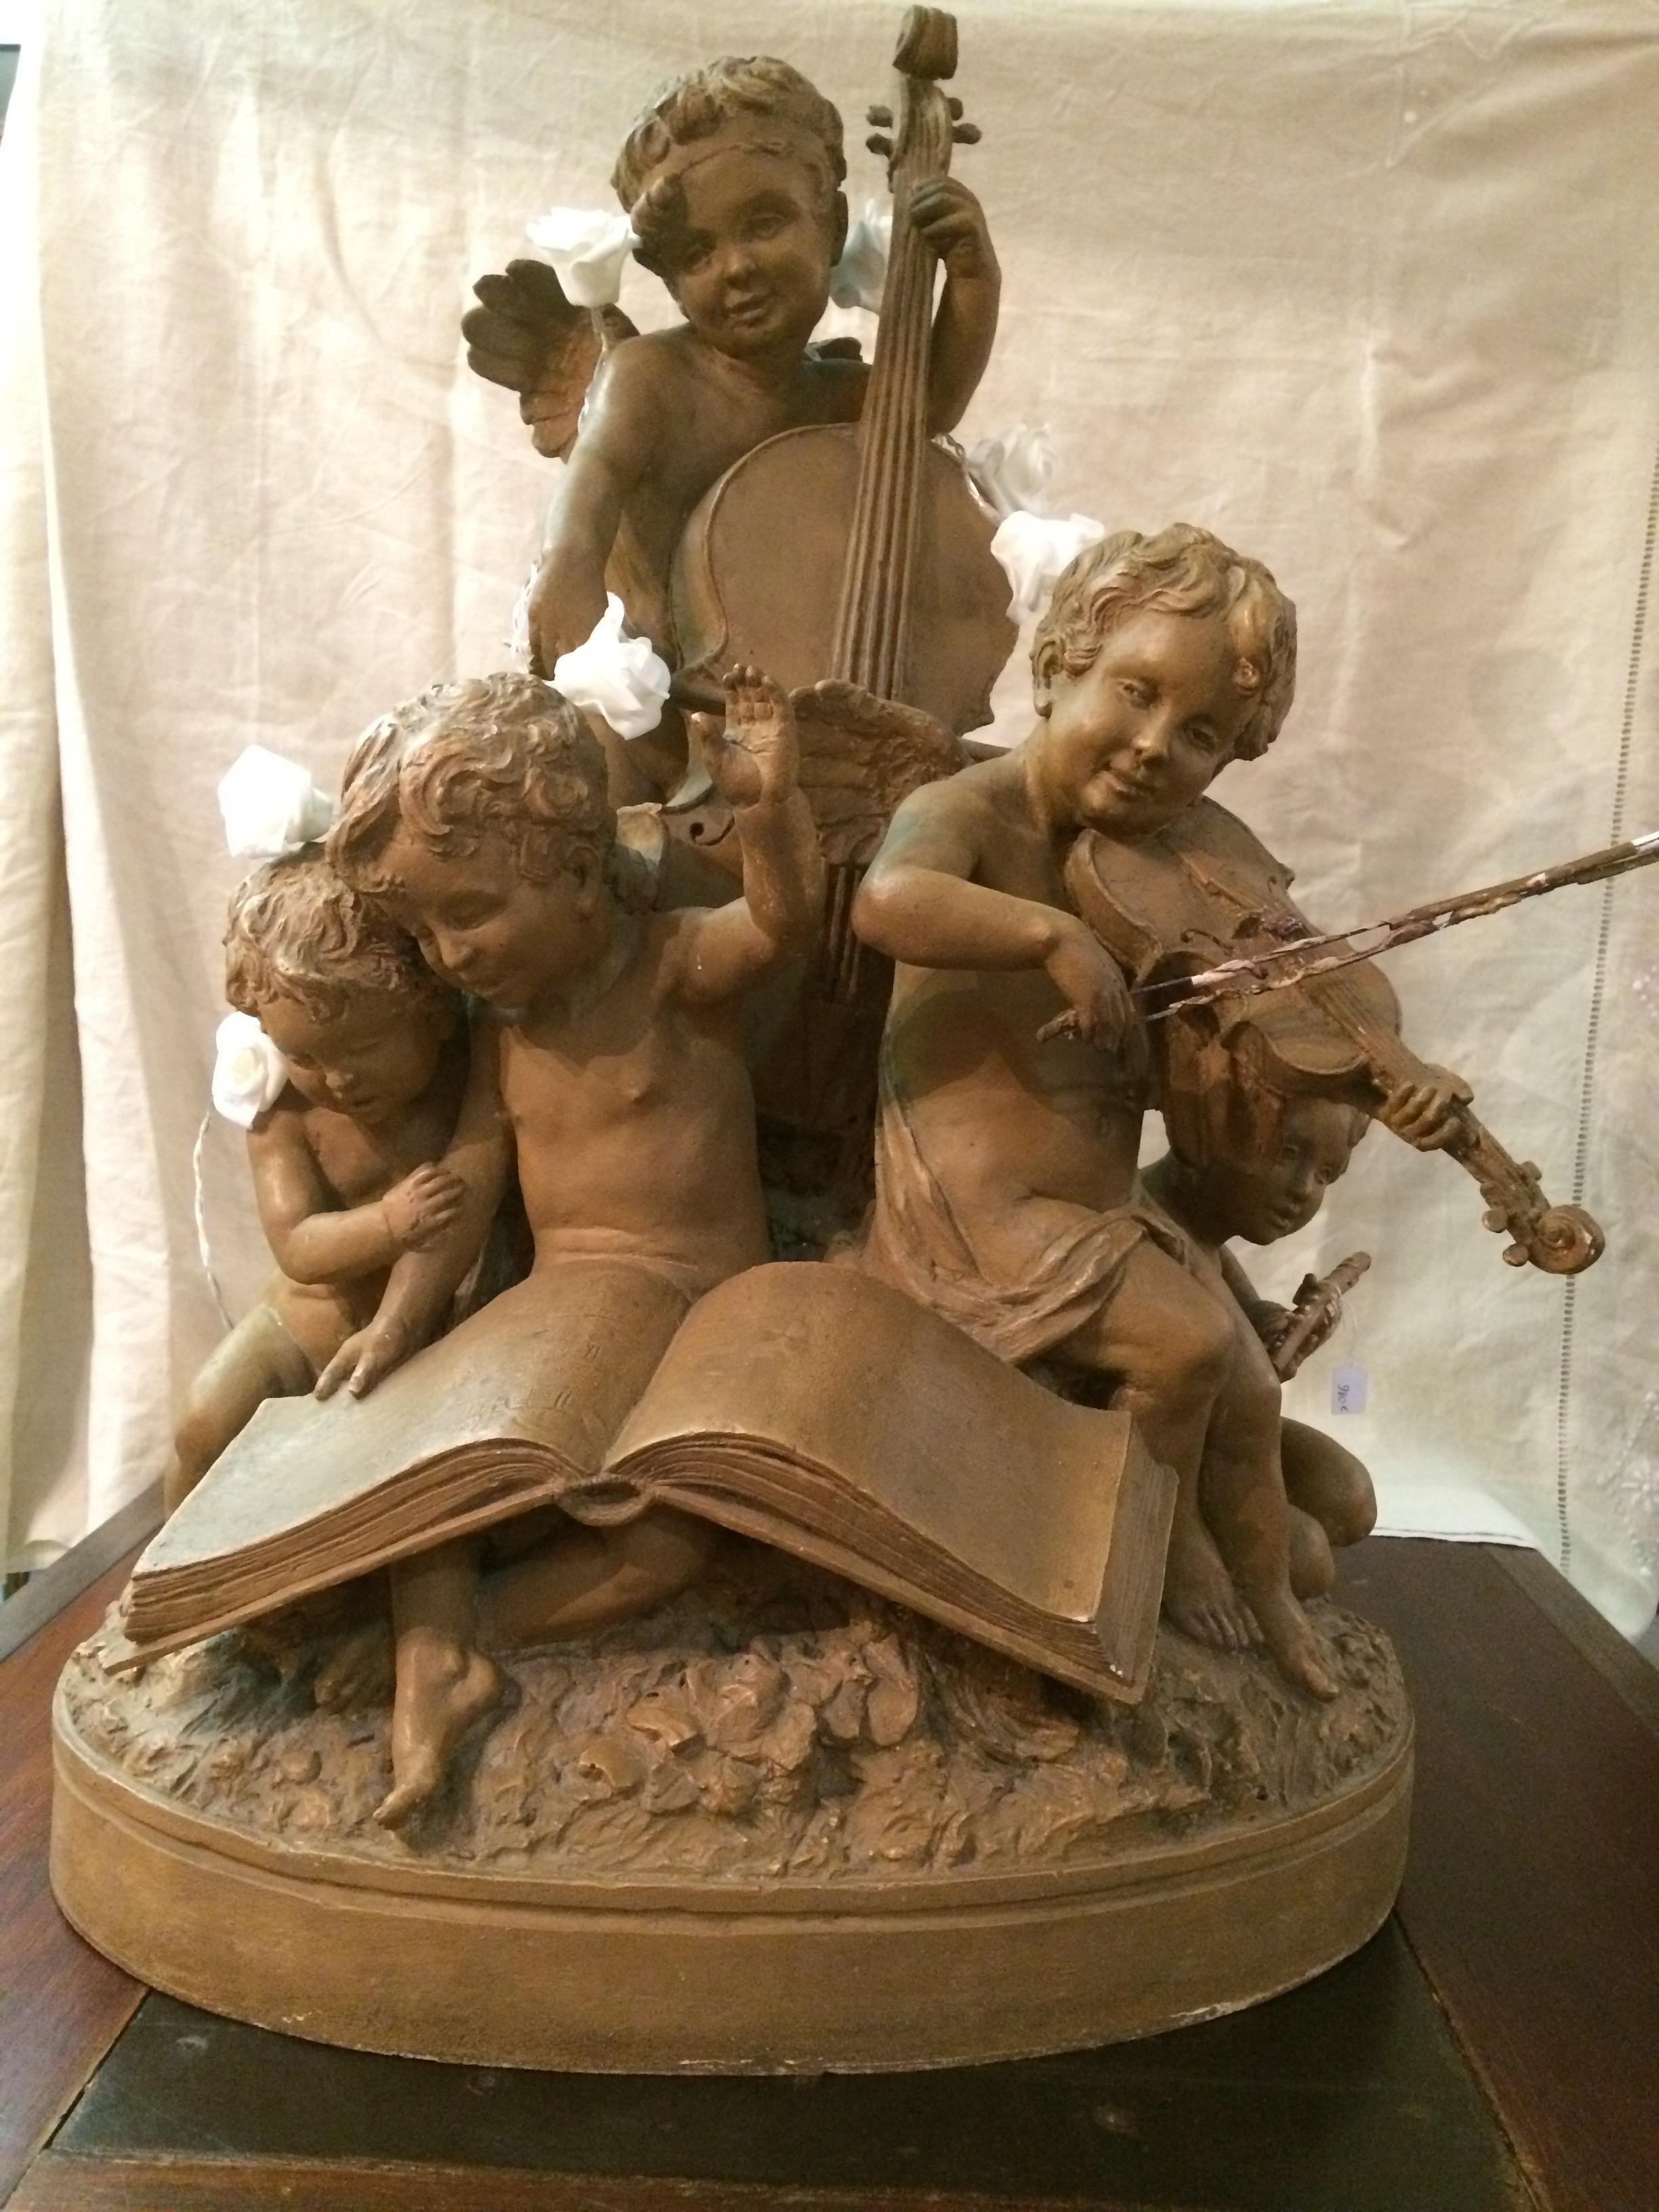 20th century French terracotta musician children angels statue signed by Guillaume Claude Henry Delaspre 1948. Artist of the French school of the first part twentieth century. The violin bow is damage, there is a lack of terracotta. 
Very delicate